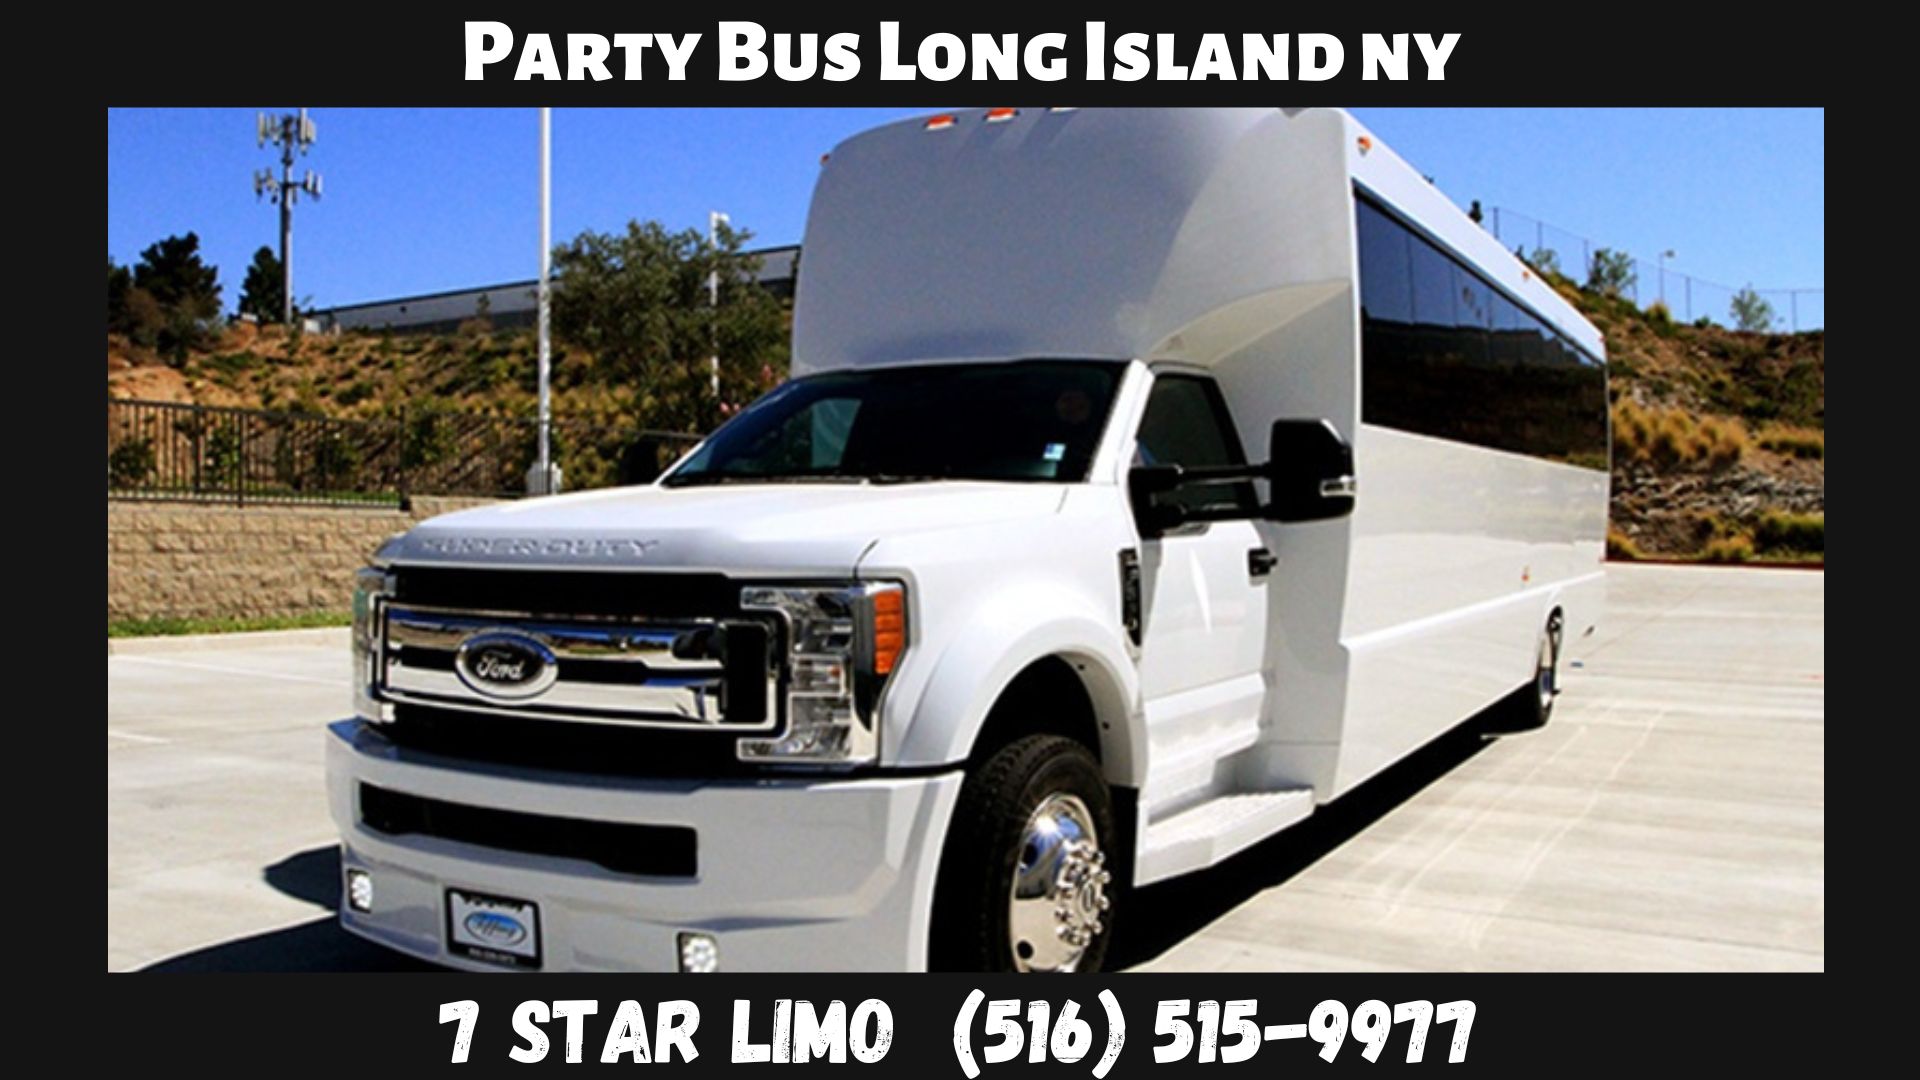 Long Island Party Bus Service